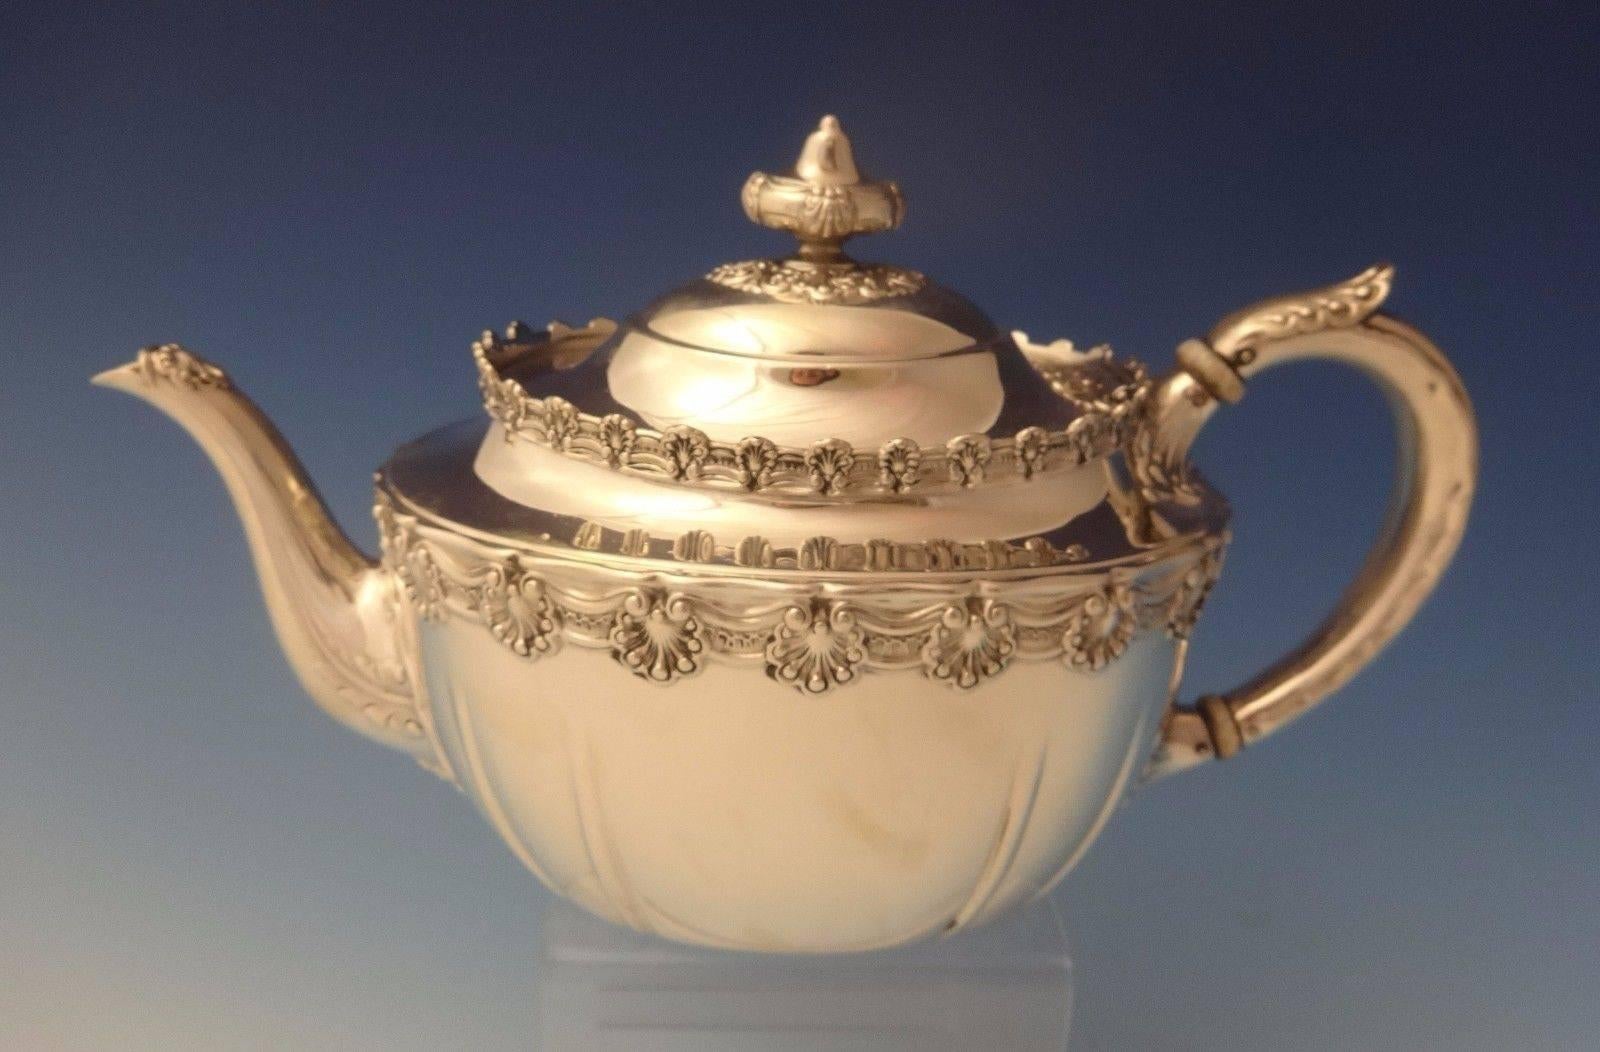 English King by Tiffany & Co. three-piece sterling tea set. The pieces are marked with a 